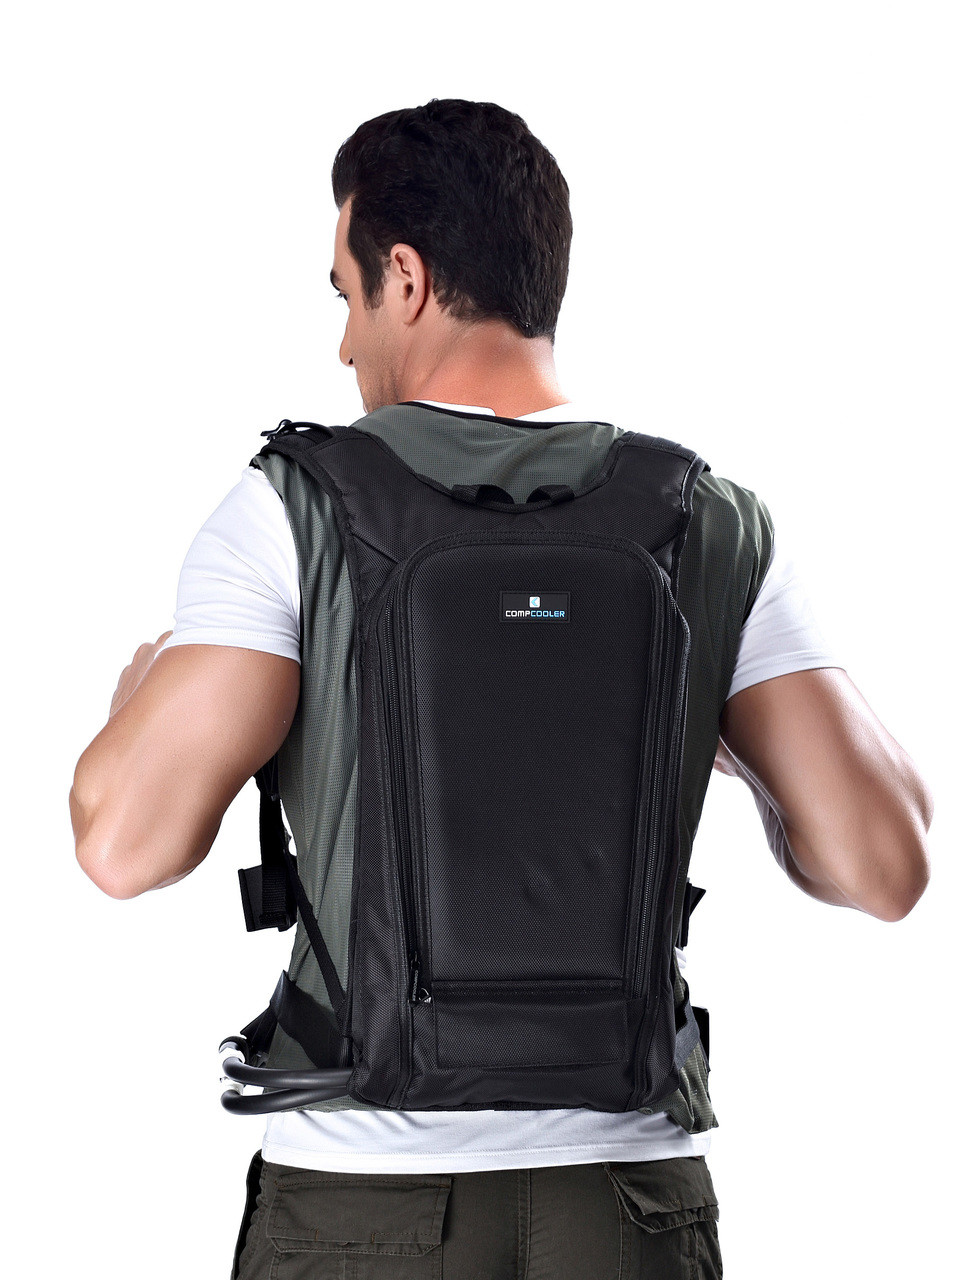 Personal Microclimate Body Cooling Vest with backpack Fixed Water Bladder